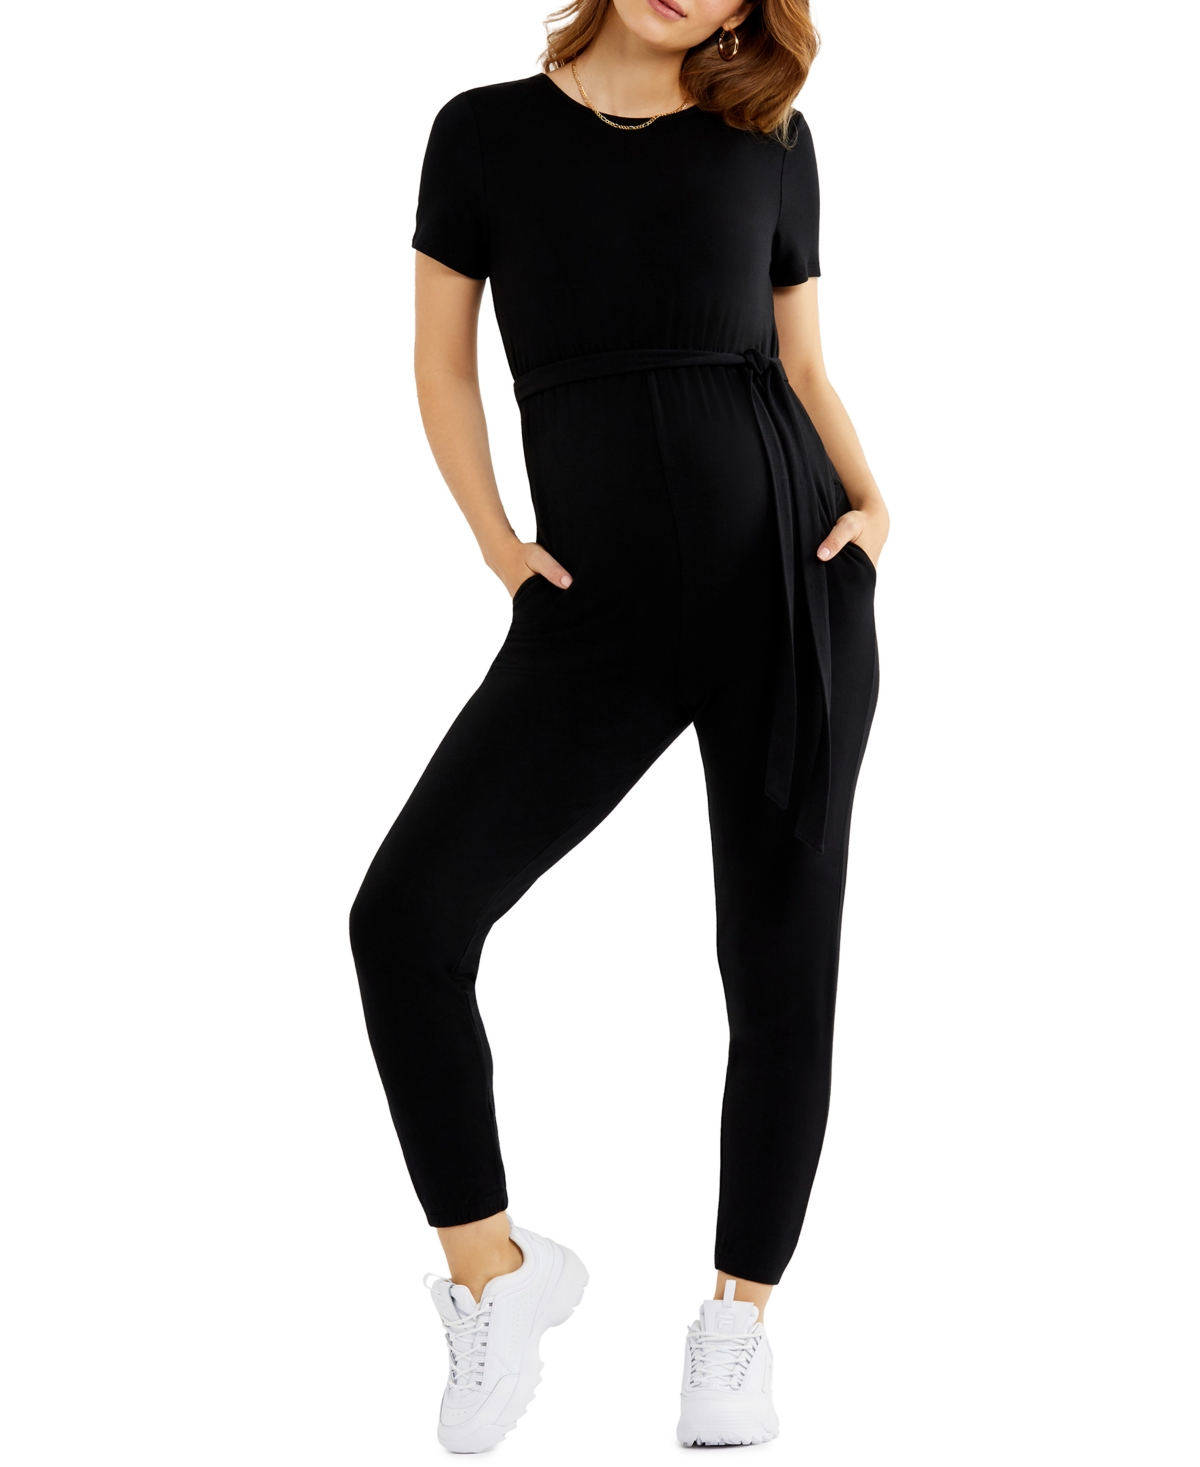 French Terry Maternity Jumpsuit - Black